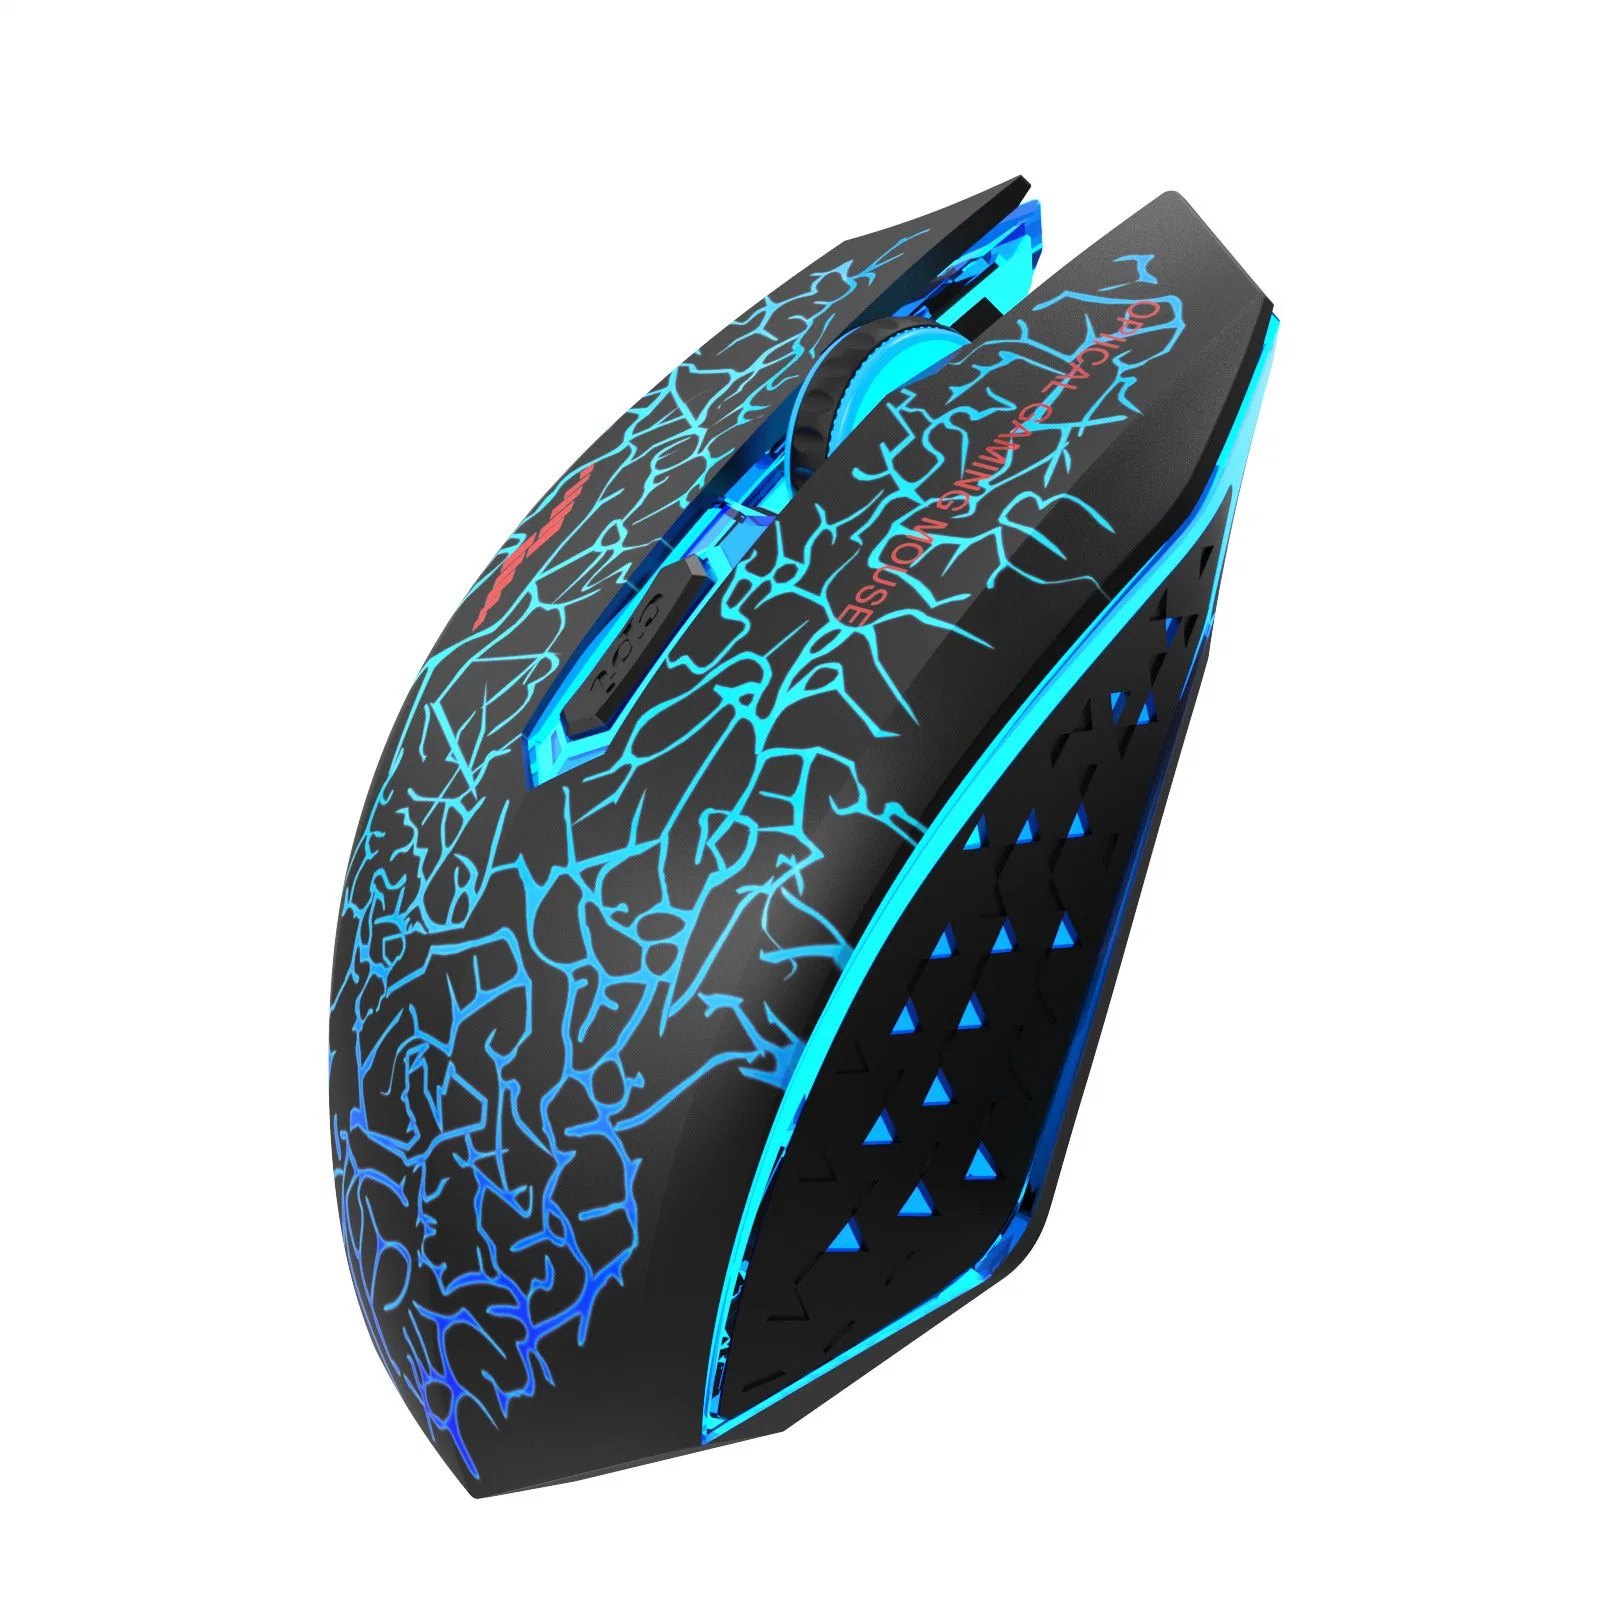 New 2.4G Wireless Mouse Notebook Silent RGB Colorful Dazzling Light 6 Keys Mouse